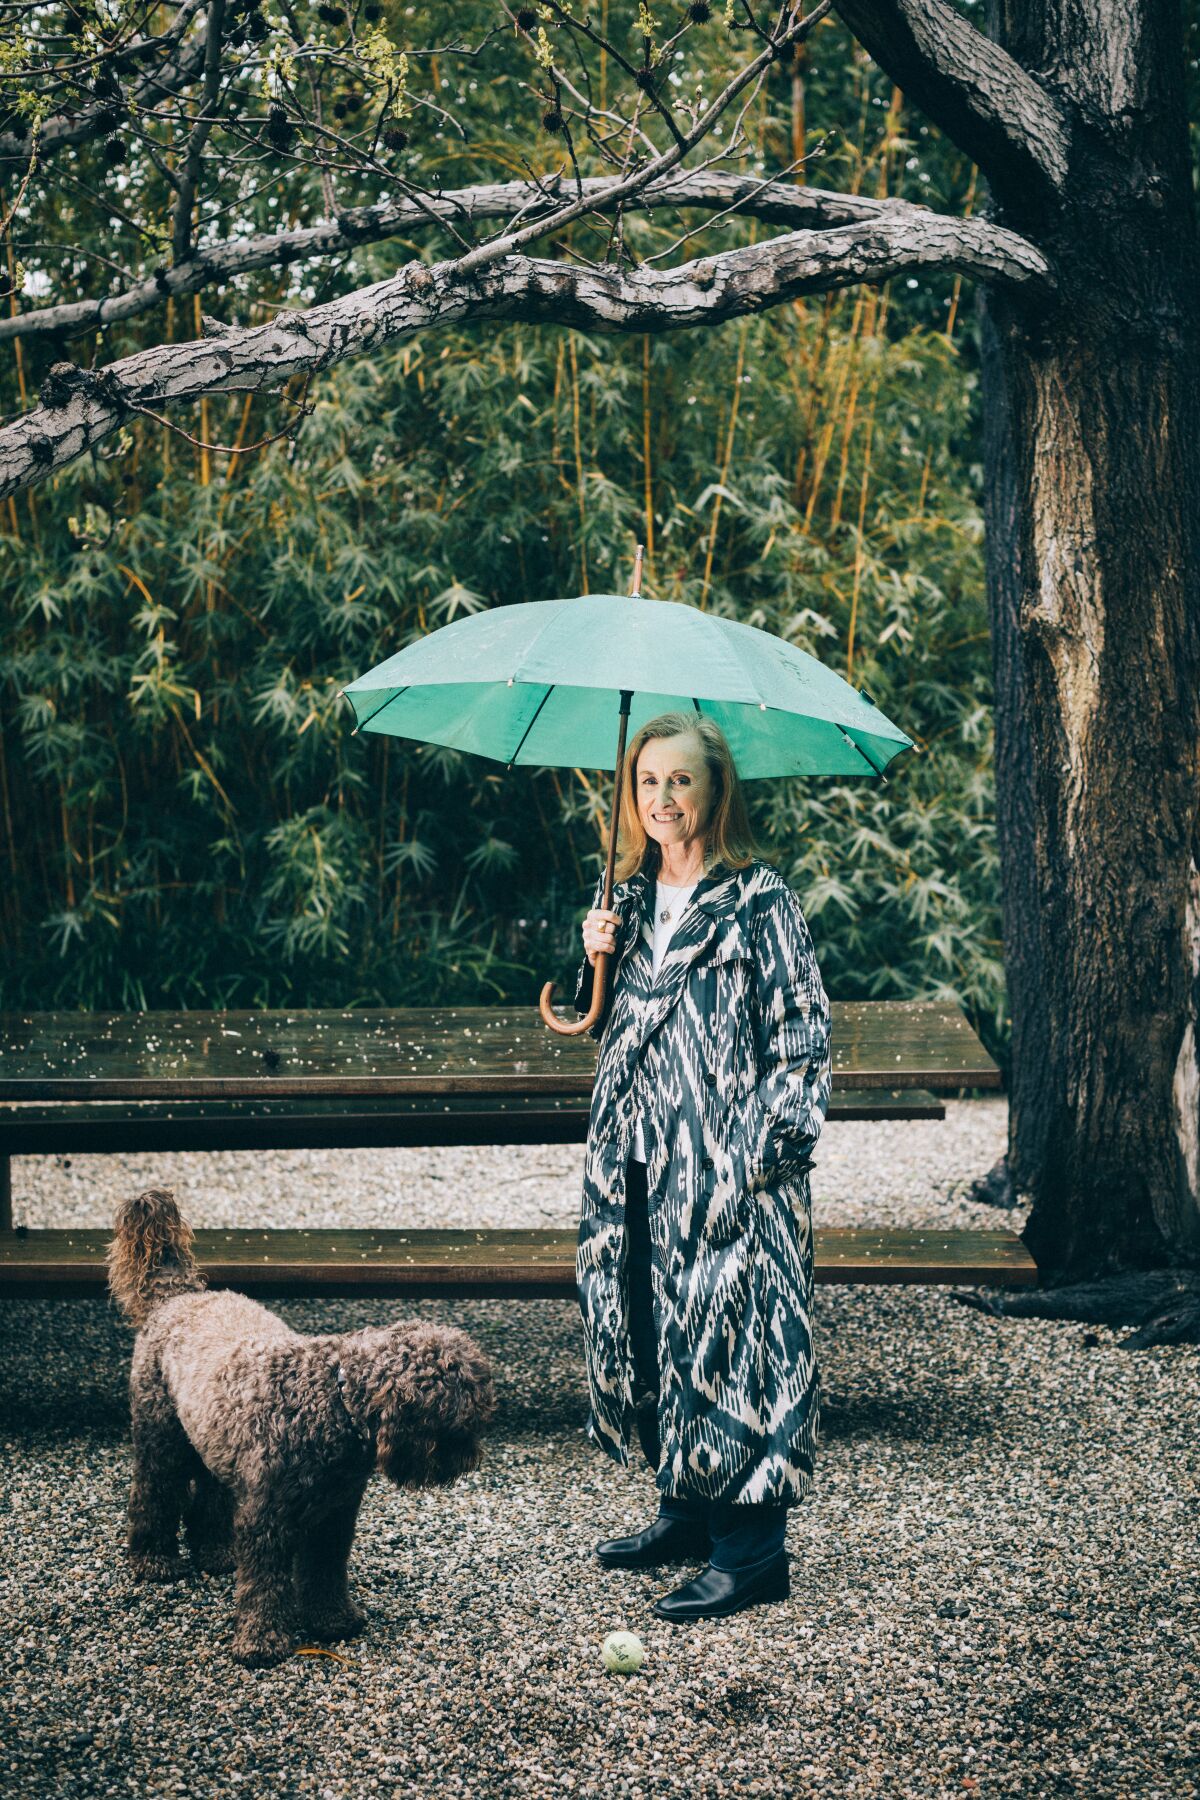 A woman stands outdoors, under a bright green umbrella, with a large brown dog.